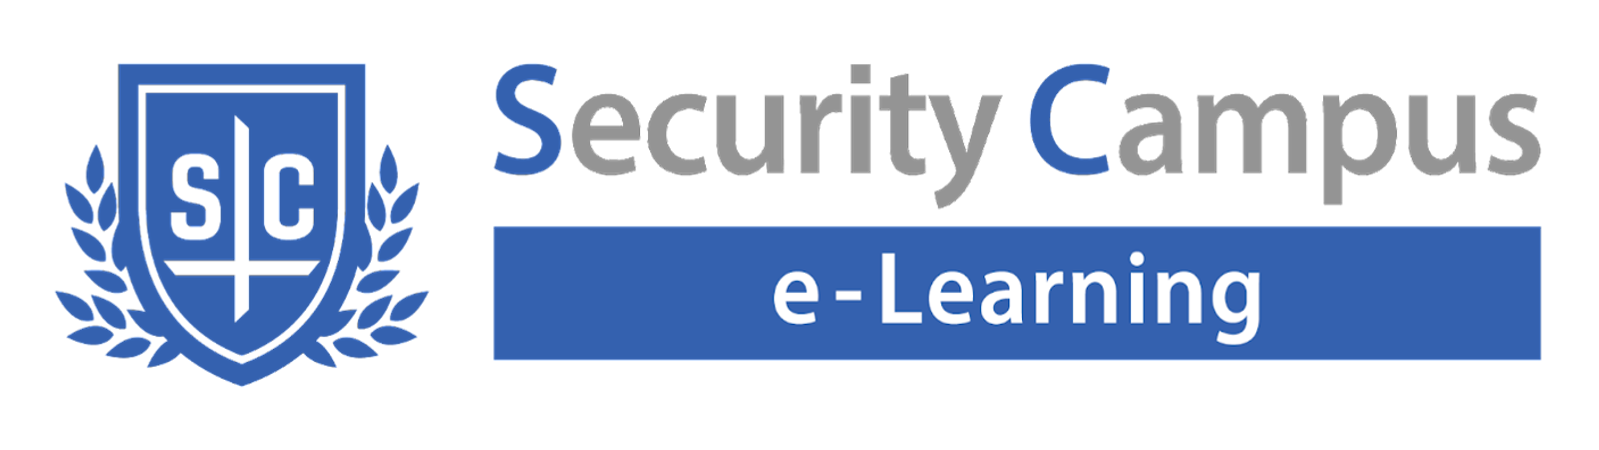 logo_Security Campus e-Learning1.png